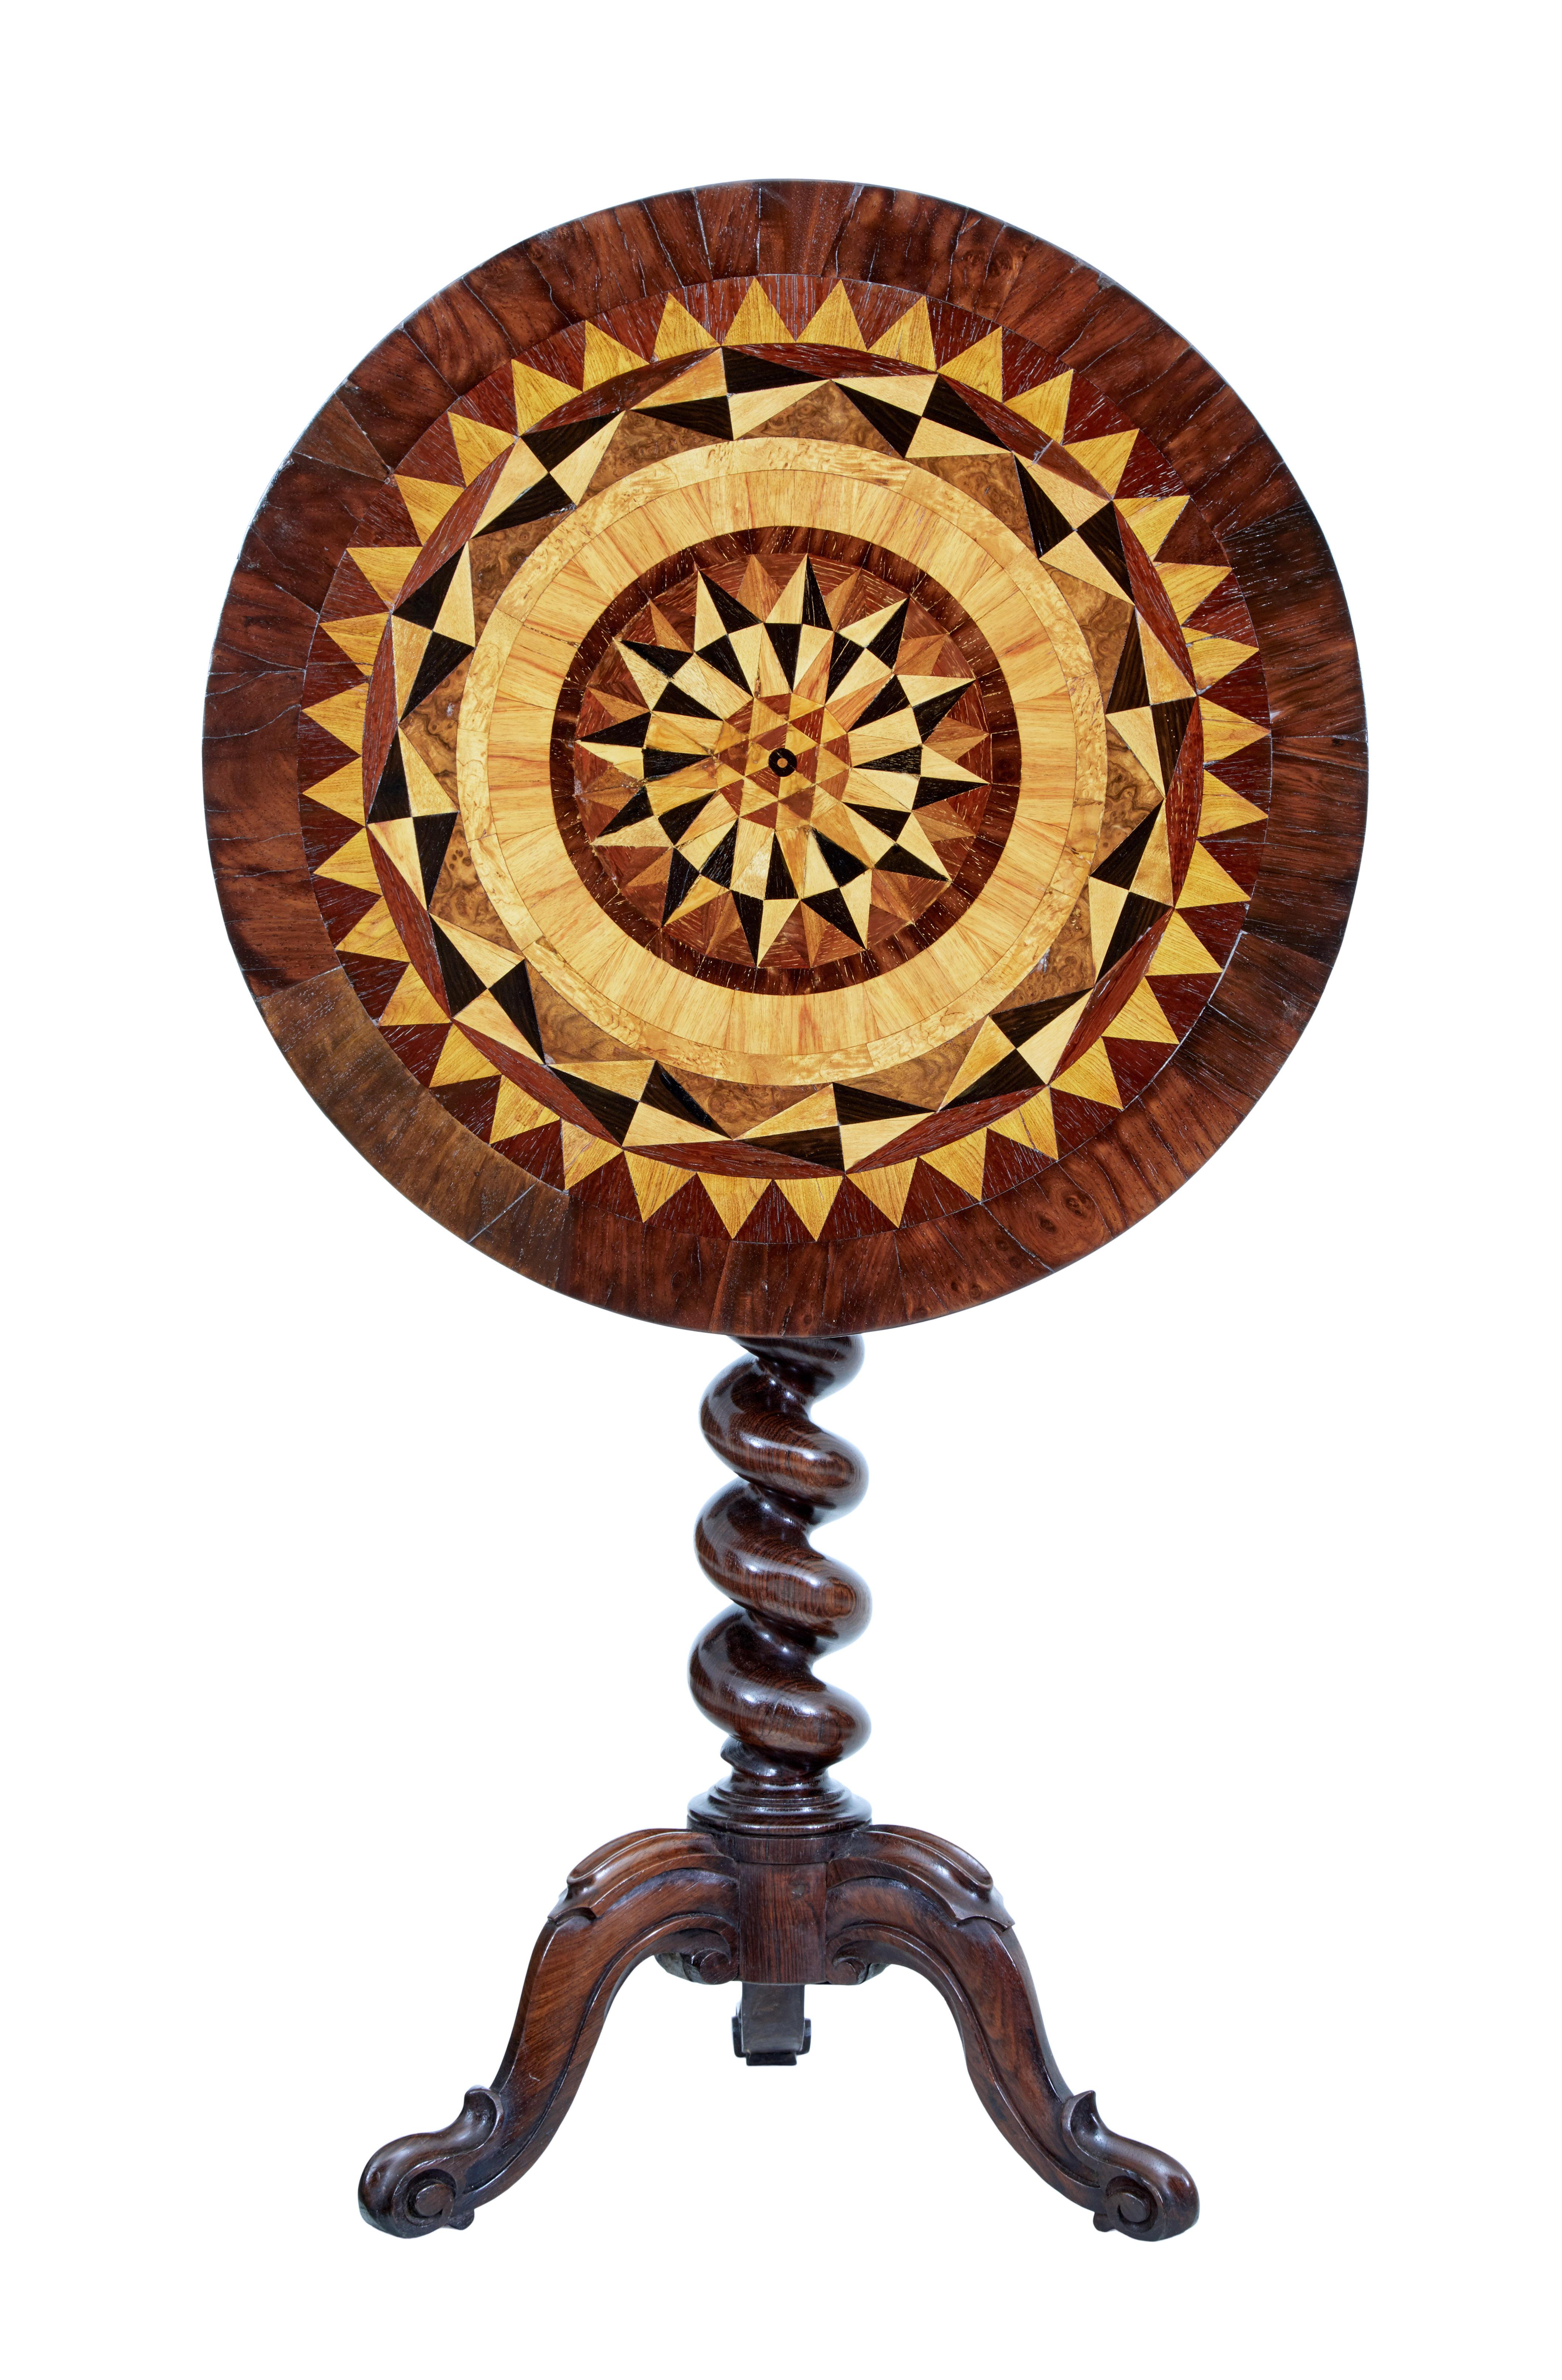 Early Victorian 19th century walnut inlaid tilt top occasional table circa 1840.

Beautifully inlaid in a symmetrical pattern with walnut, birch, coromandel and various burrs, with outer walnut edge.

Top tilts for display and